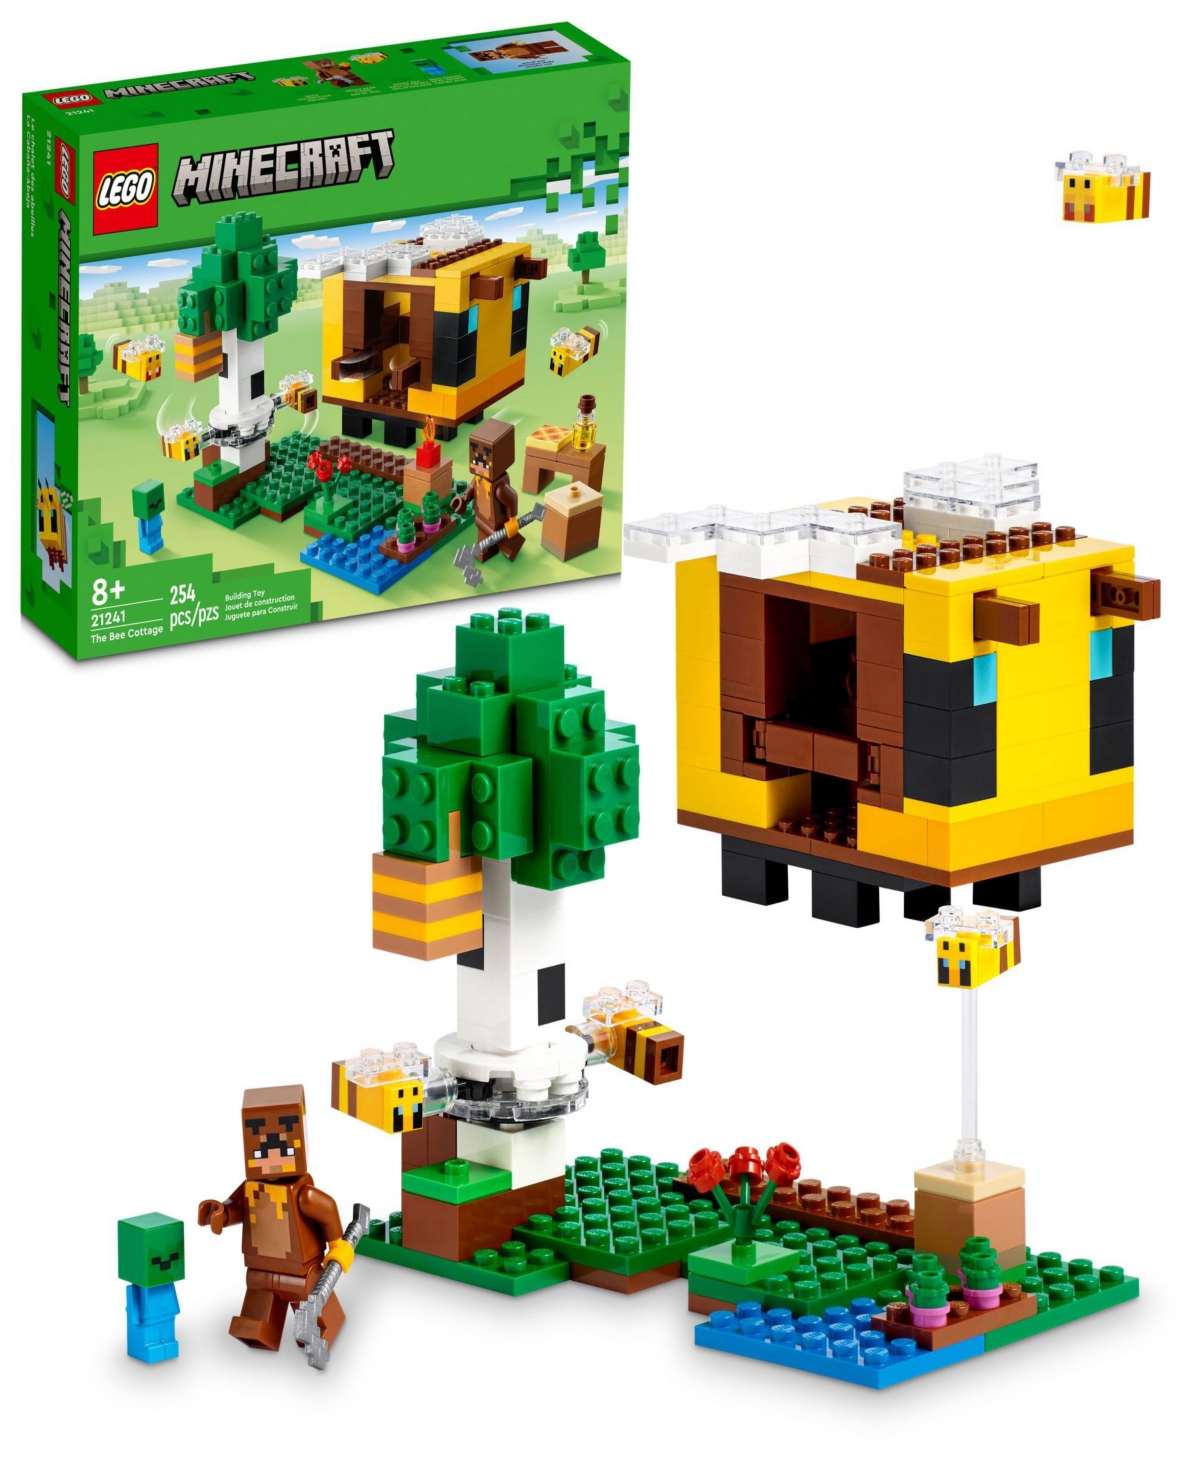 Lego Minecraft The Bee Cottage 21241 Toy Building Set With Honey Bear, Baby Zombie And Bee Figures In Multicolor